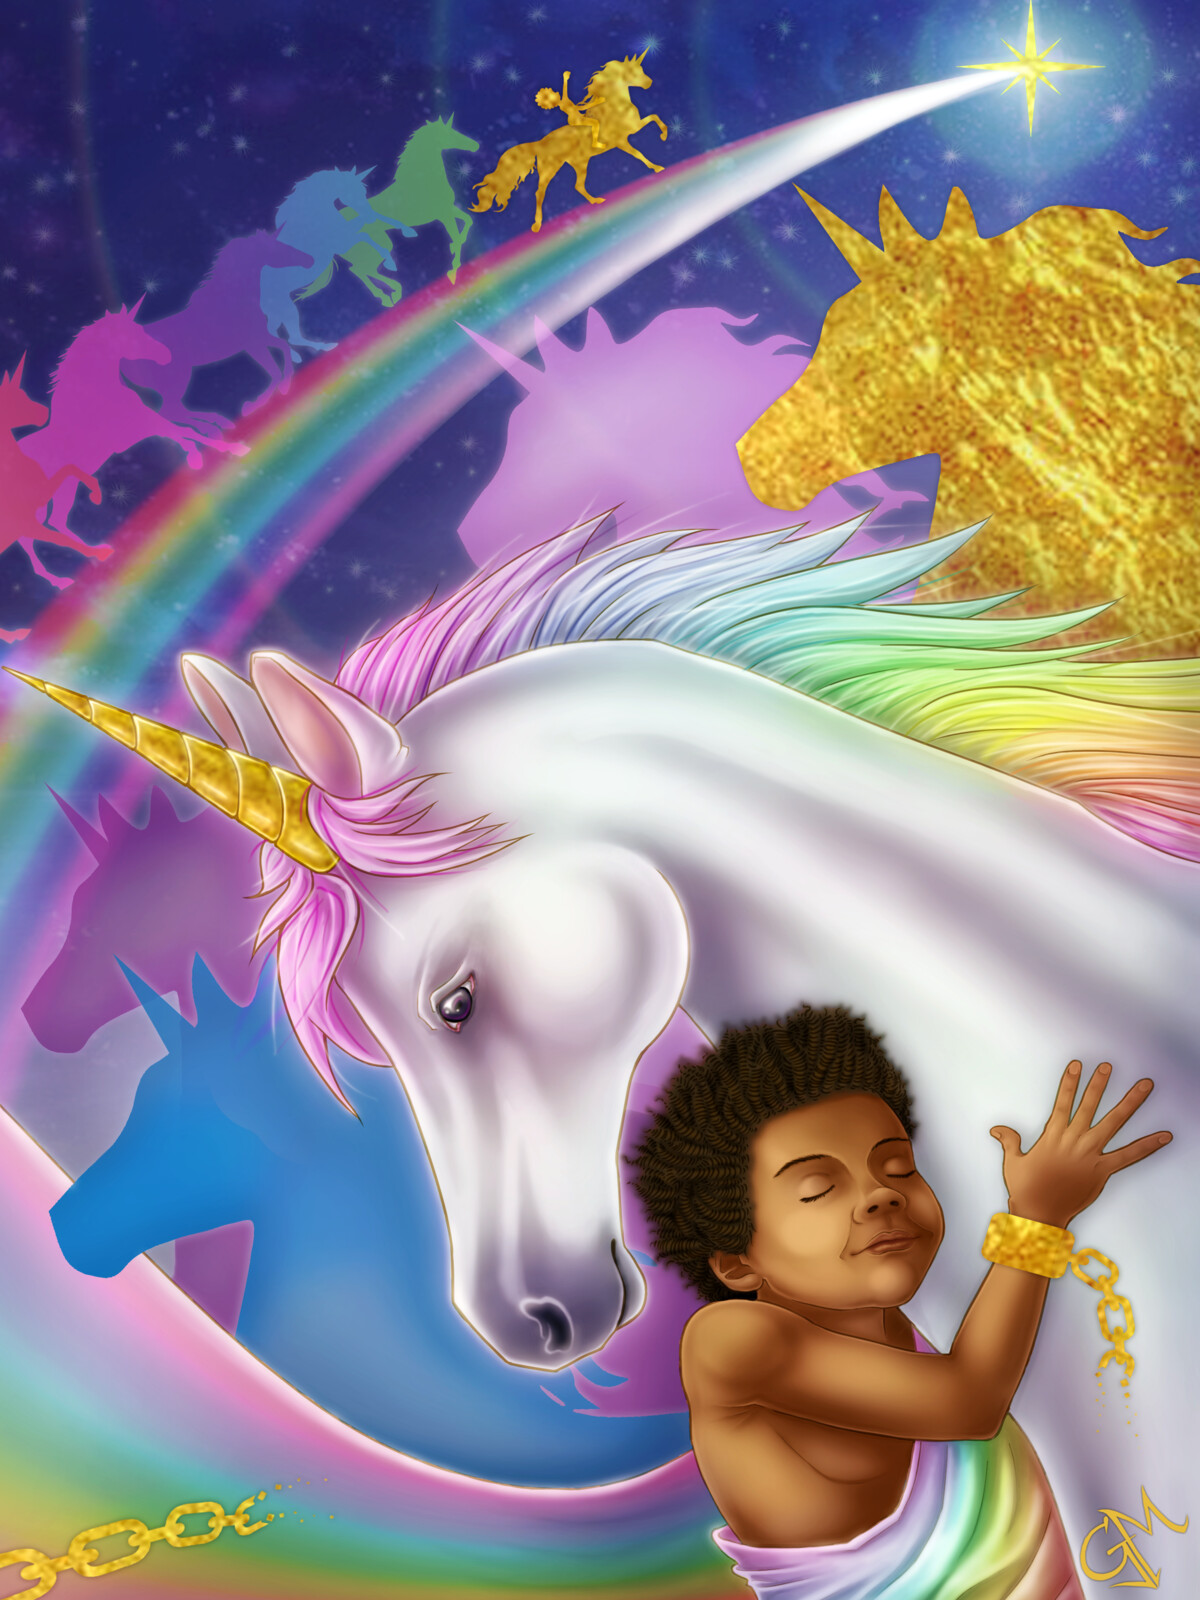 Unicorn and Negrinho do Pastoreio
Negrinho do Pastoreio is a Brazilian myth of a black slave boy, who helps people to finds their belongings, a symbol for the fight for freedom and the end of slavery in Brazil. 